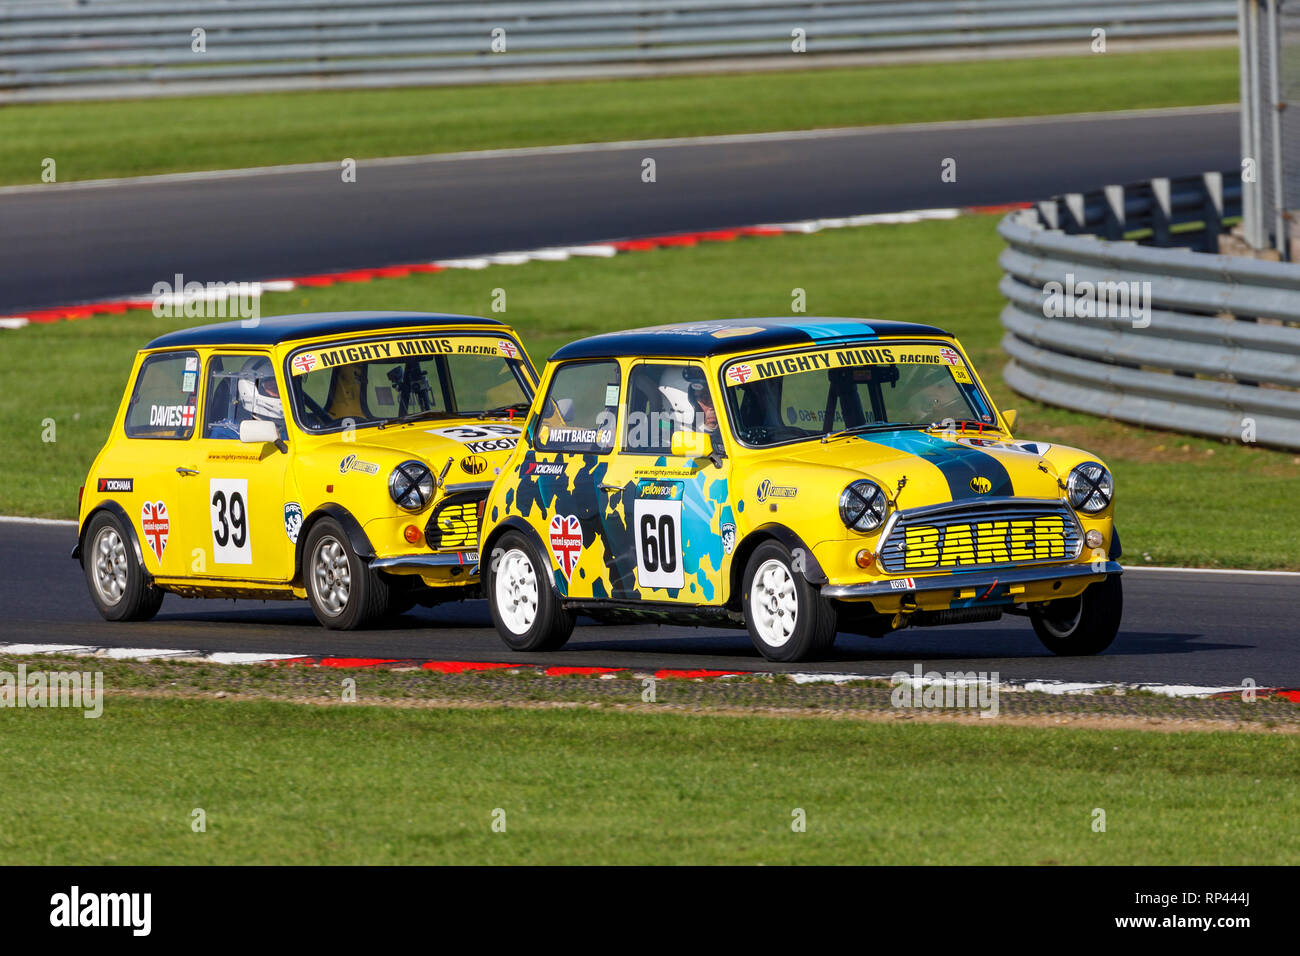 Matthew Baker and Mark Davies battle it out in the Mighty Minis Championship race at Snetterton 2018, Norfolk, UK. Stock Photo